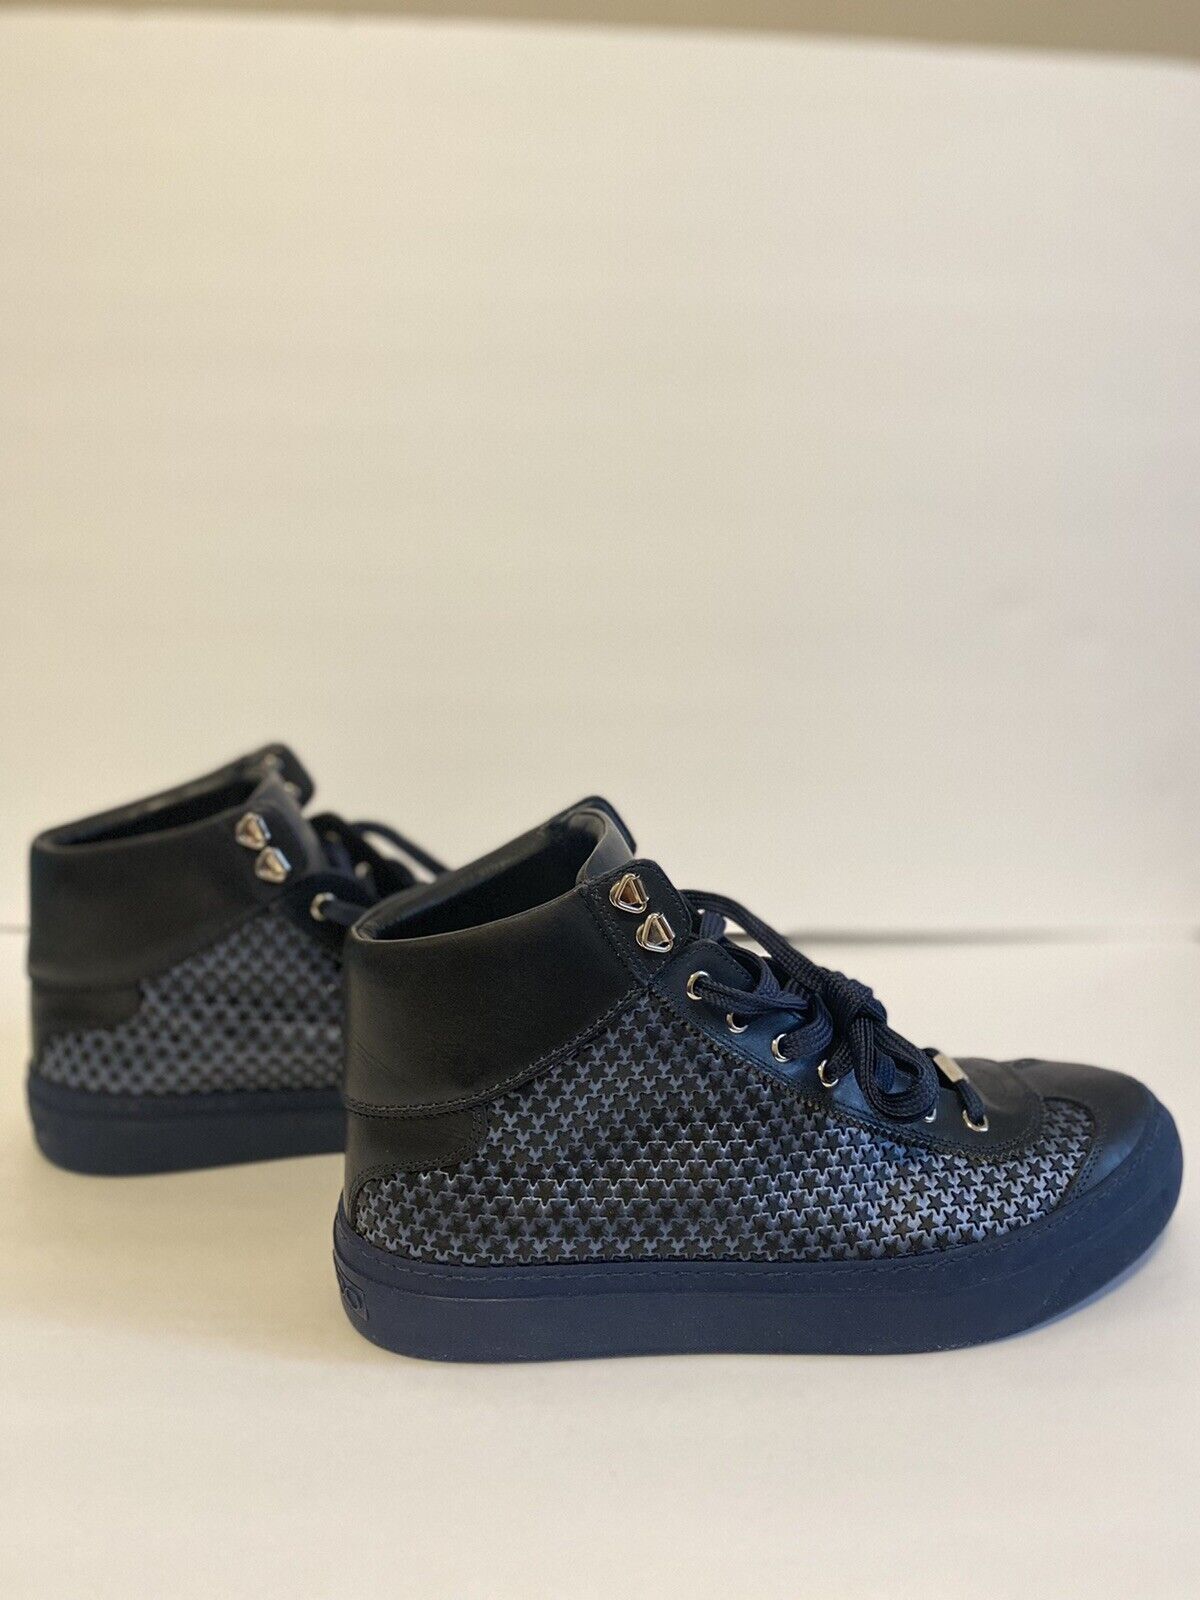 Jimmy Choo Mini Stars Argyle Dark Blue High Top Sneakers Made in Italy $795  MSRP